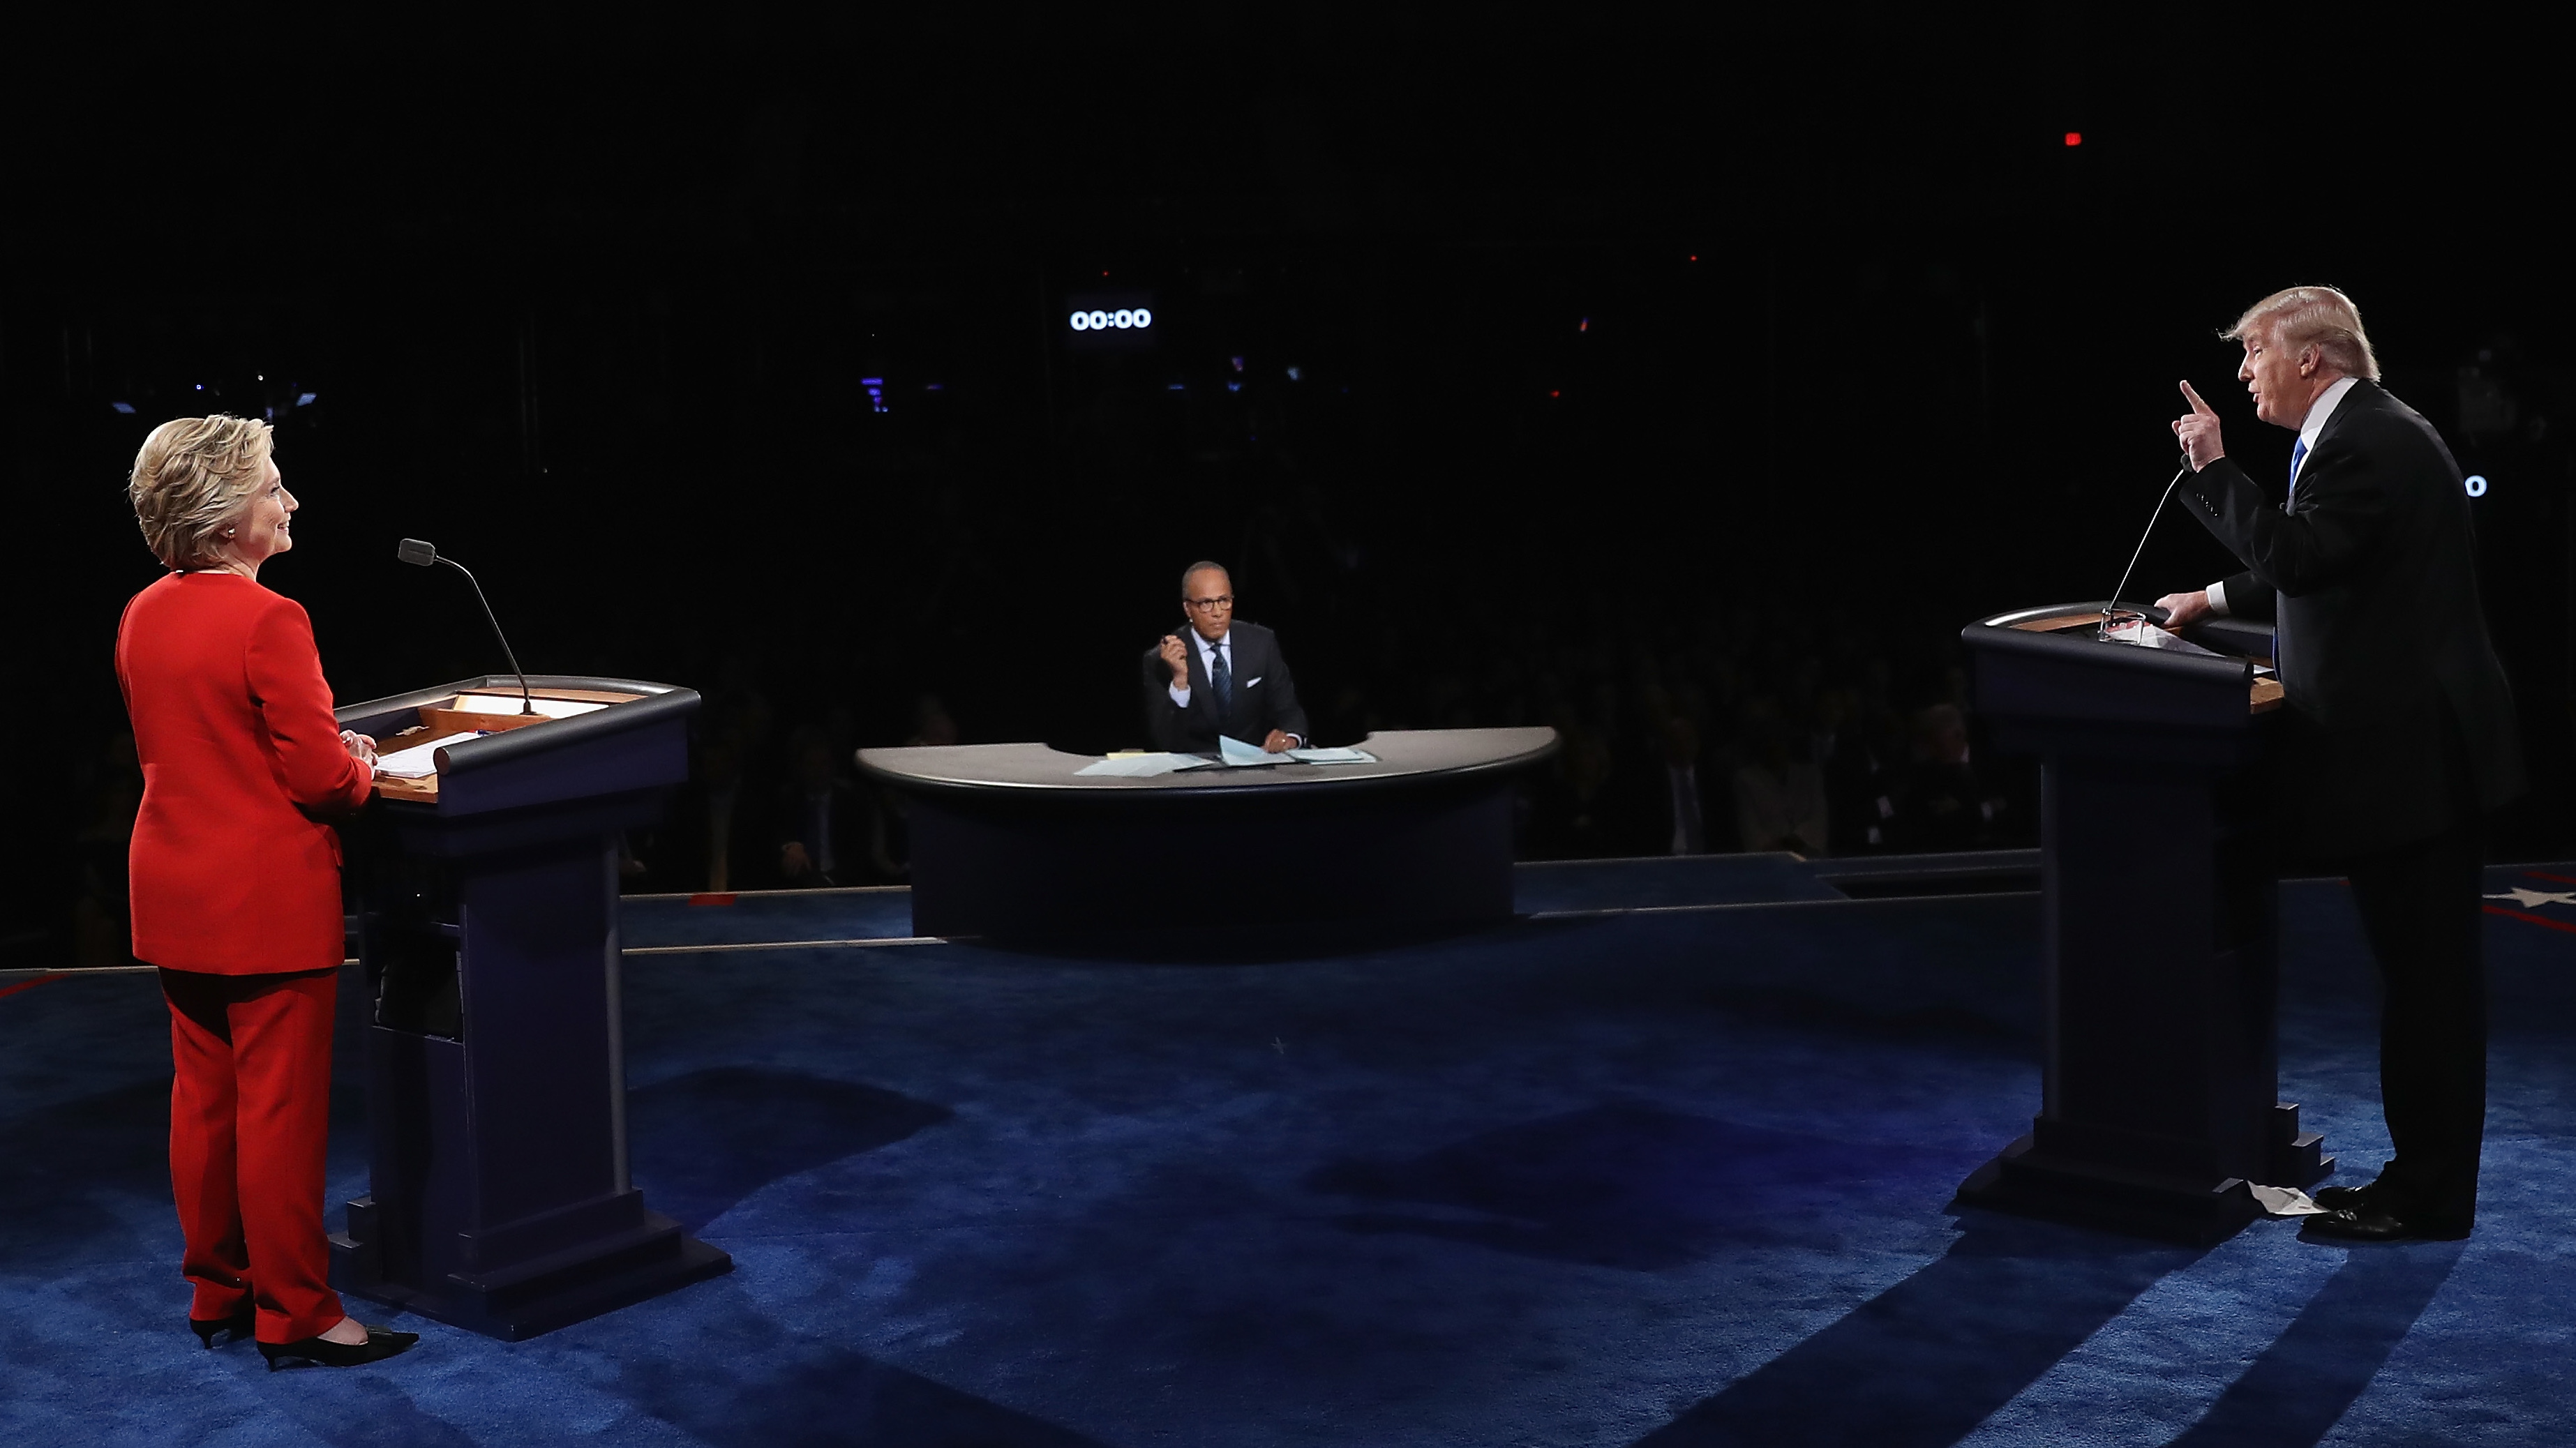 Republican presidential nominee Donald Trump speaks as Democratic presidential nominee Hillary Clinton and moderator Lester Holt listen during Monday night's presidential debate at Hofstra University in Hempstead, N.Y.